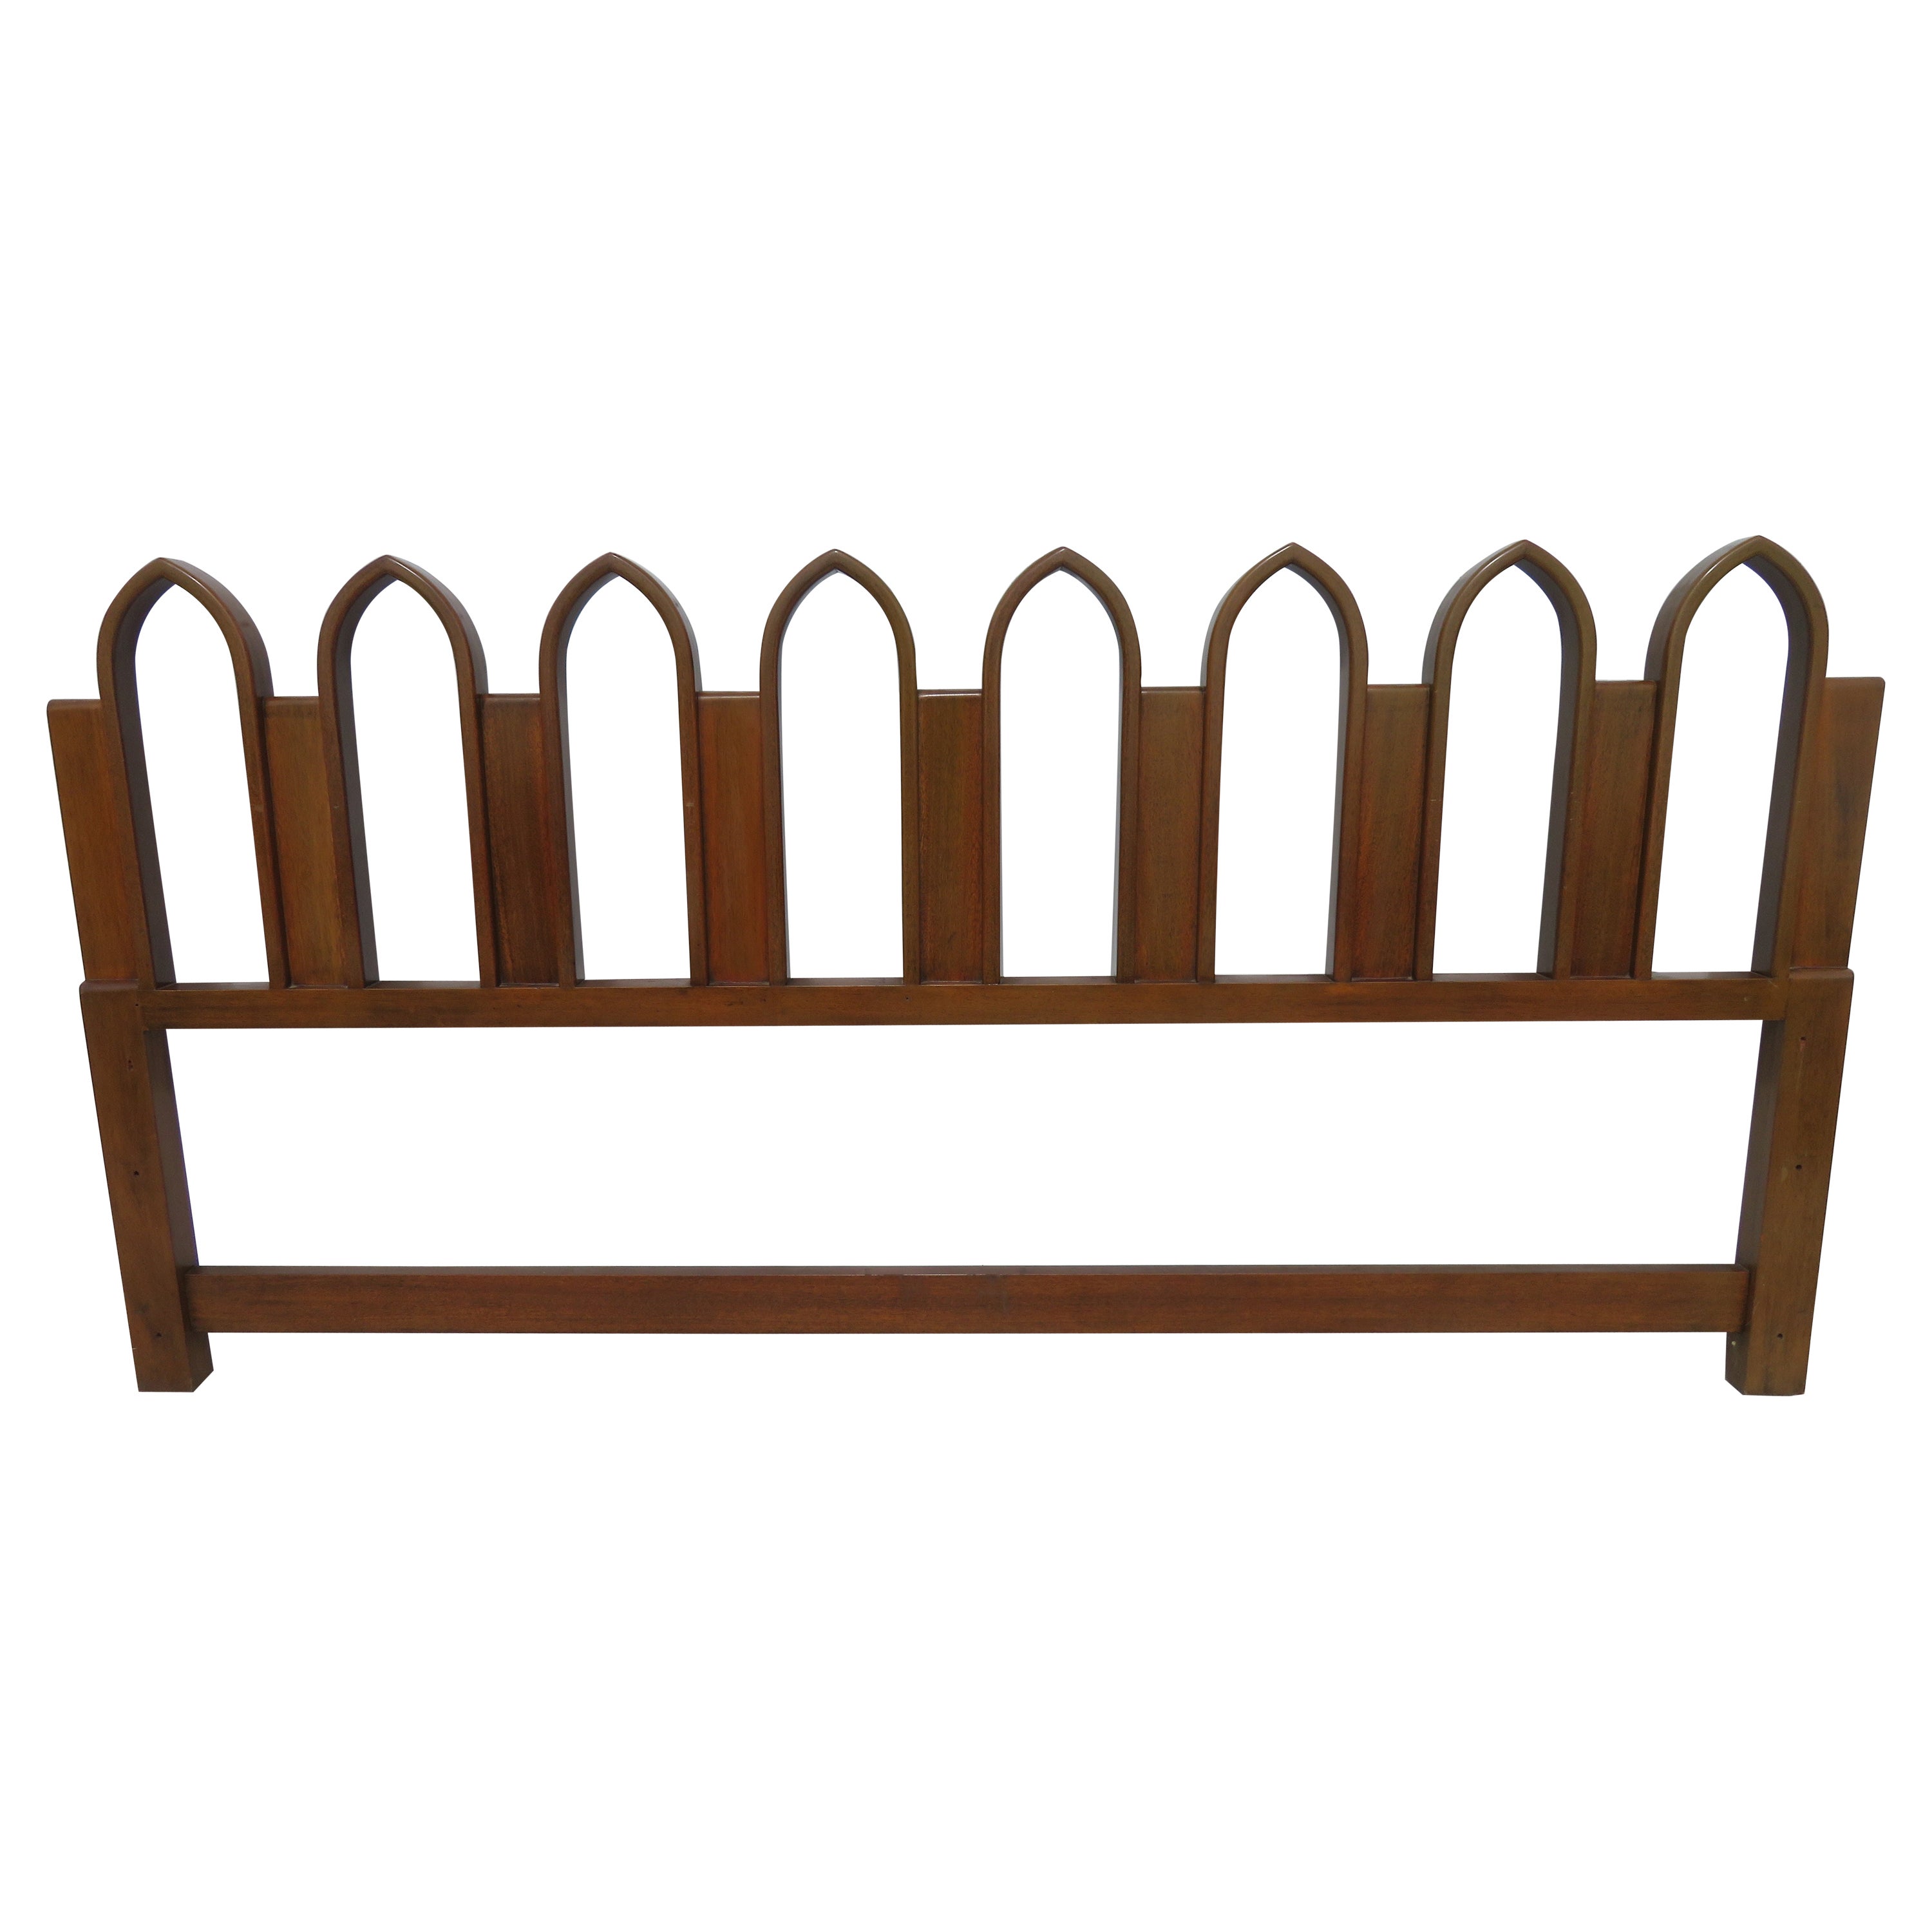 Stunning Cathedral Style Walnut Kingsize Headboard, Mid-Century Modern For Sale